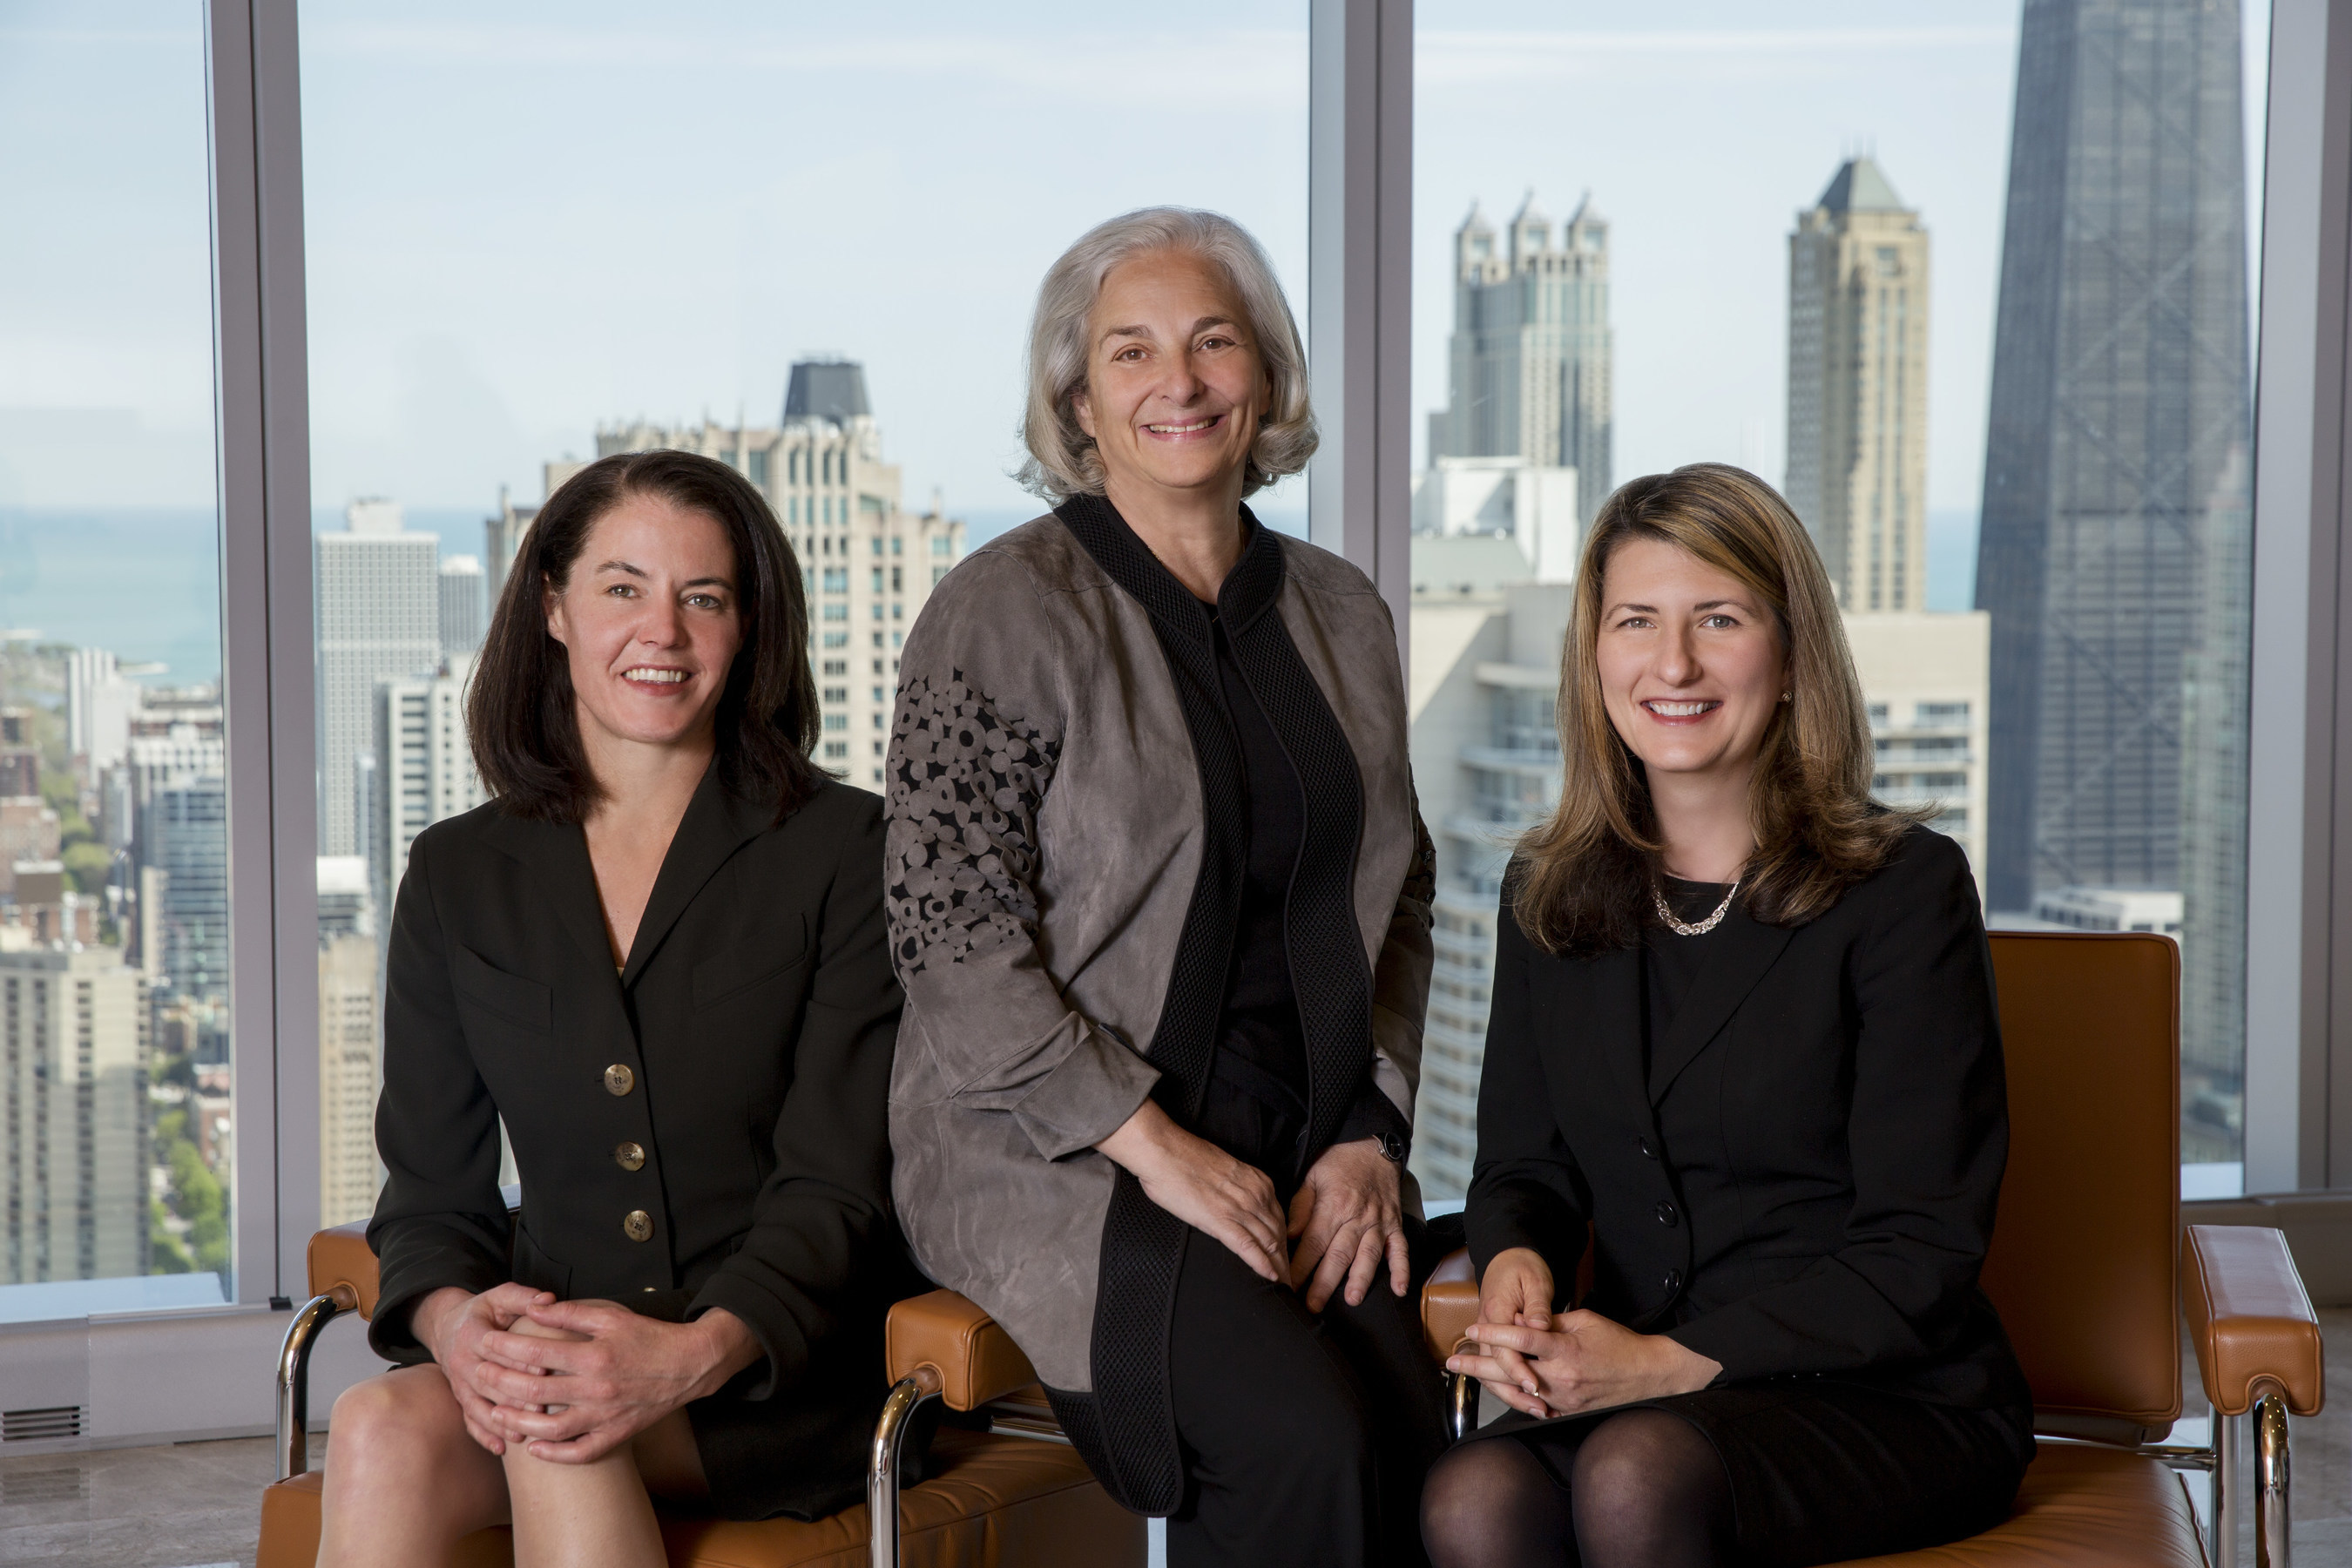 (left to right) Anne E. Brynn, H. Debra Levin, Barbara Grayson of Jenner & Block. Levin and Grayson are co-chairs of Jenner & Block's Private Wealth Practice.